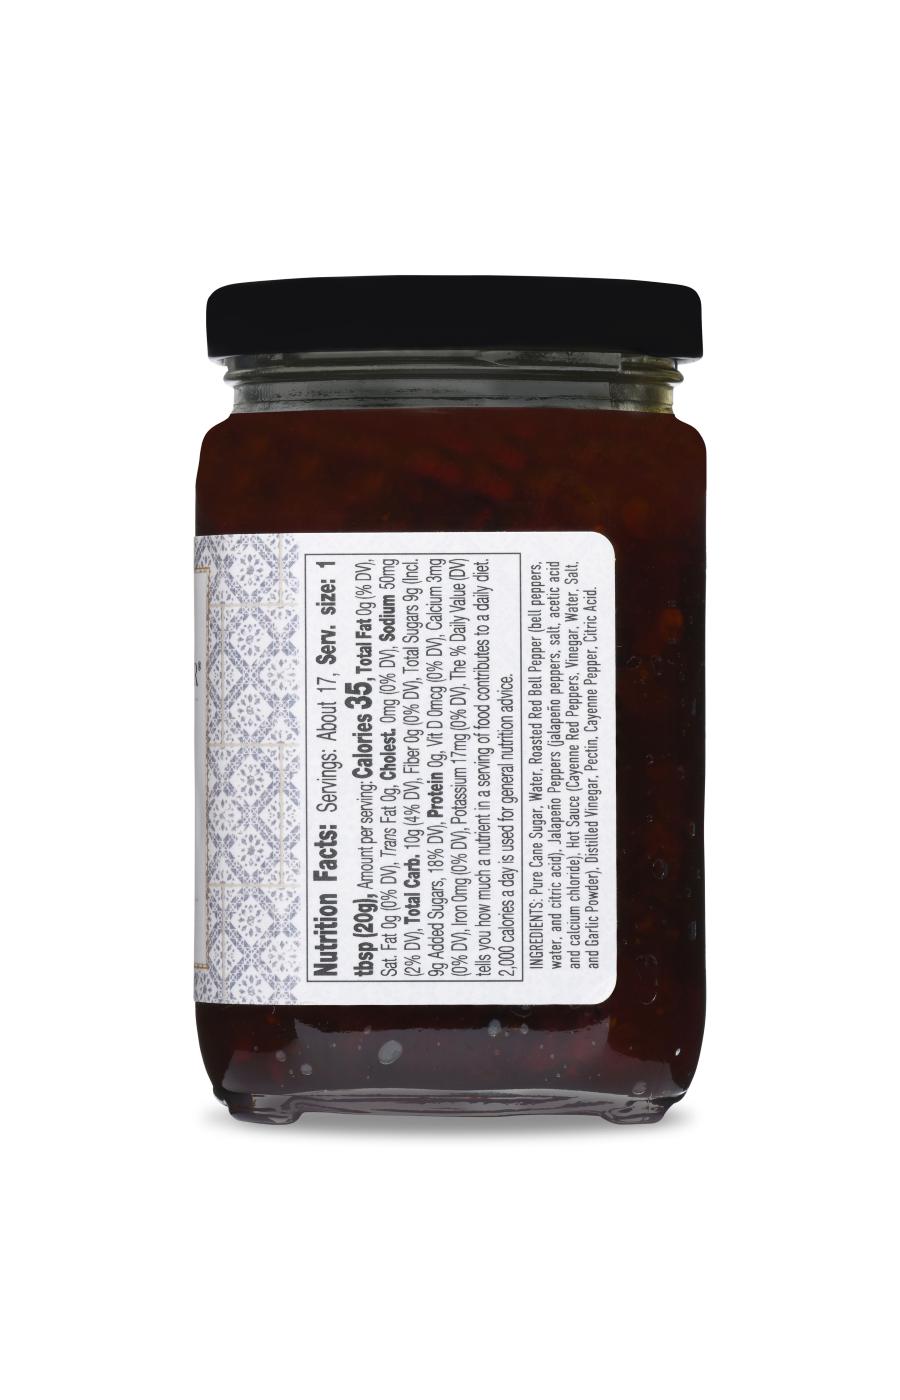 Fischer & Wieser Four Star Provisions Texas Heat Pepper Jelly; image 3 of 3